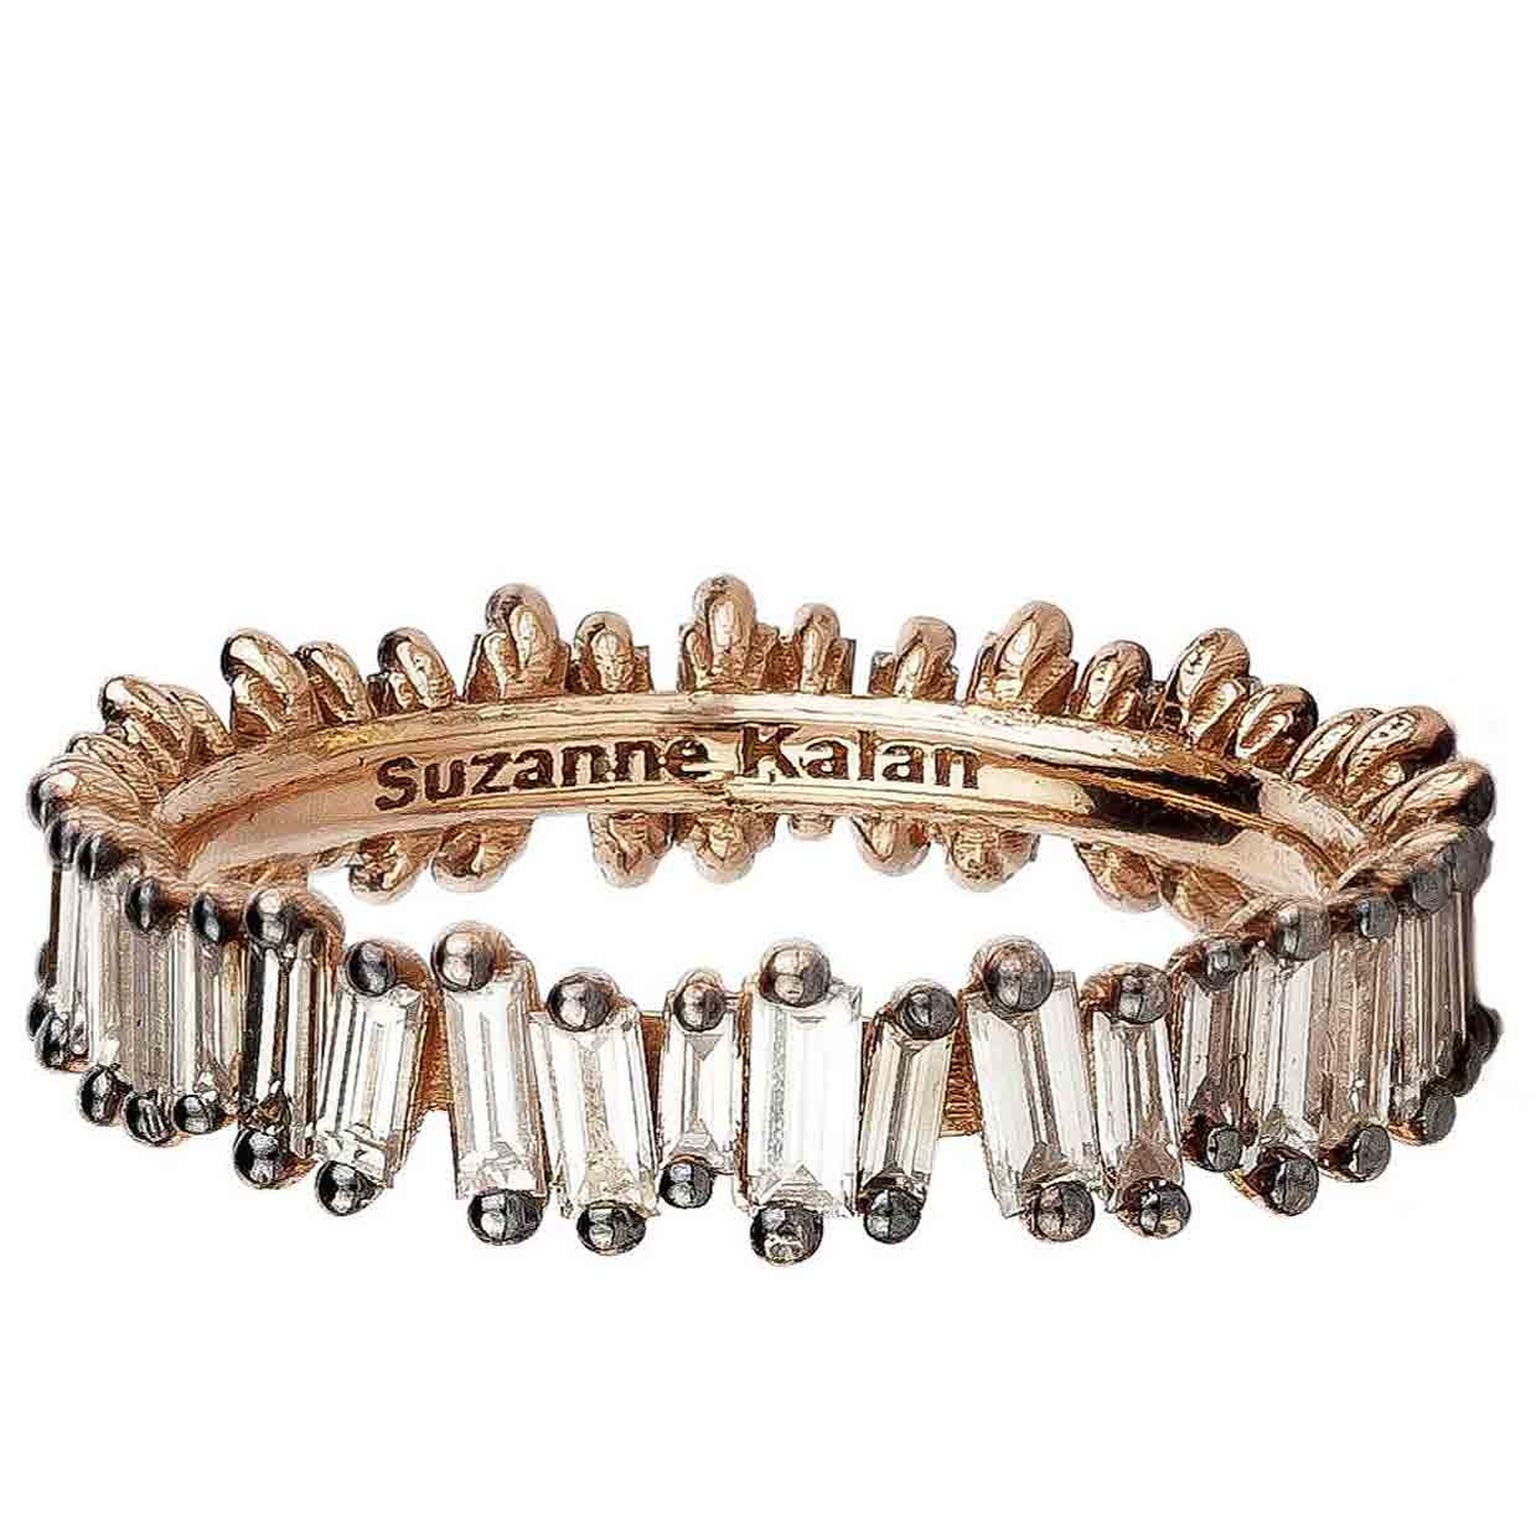 Suzanne Kalan Fireworks rose gold ring with baguette champagne diamonds